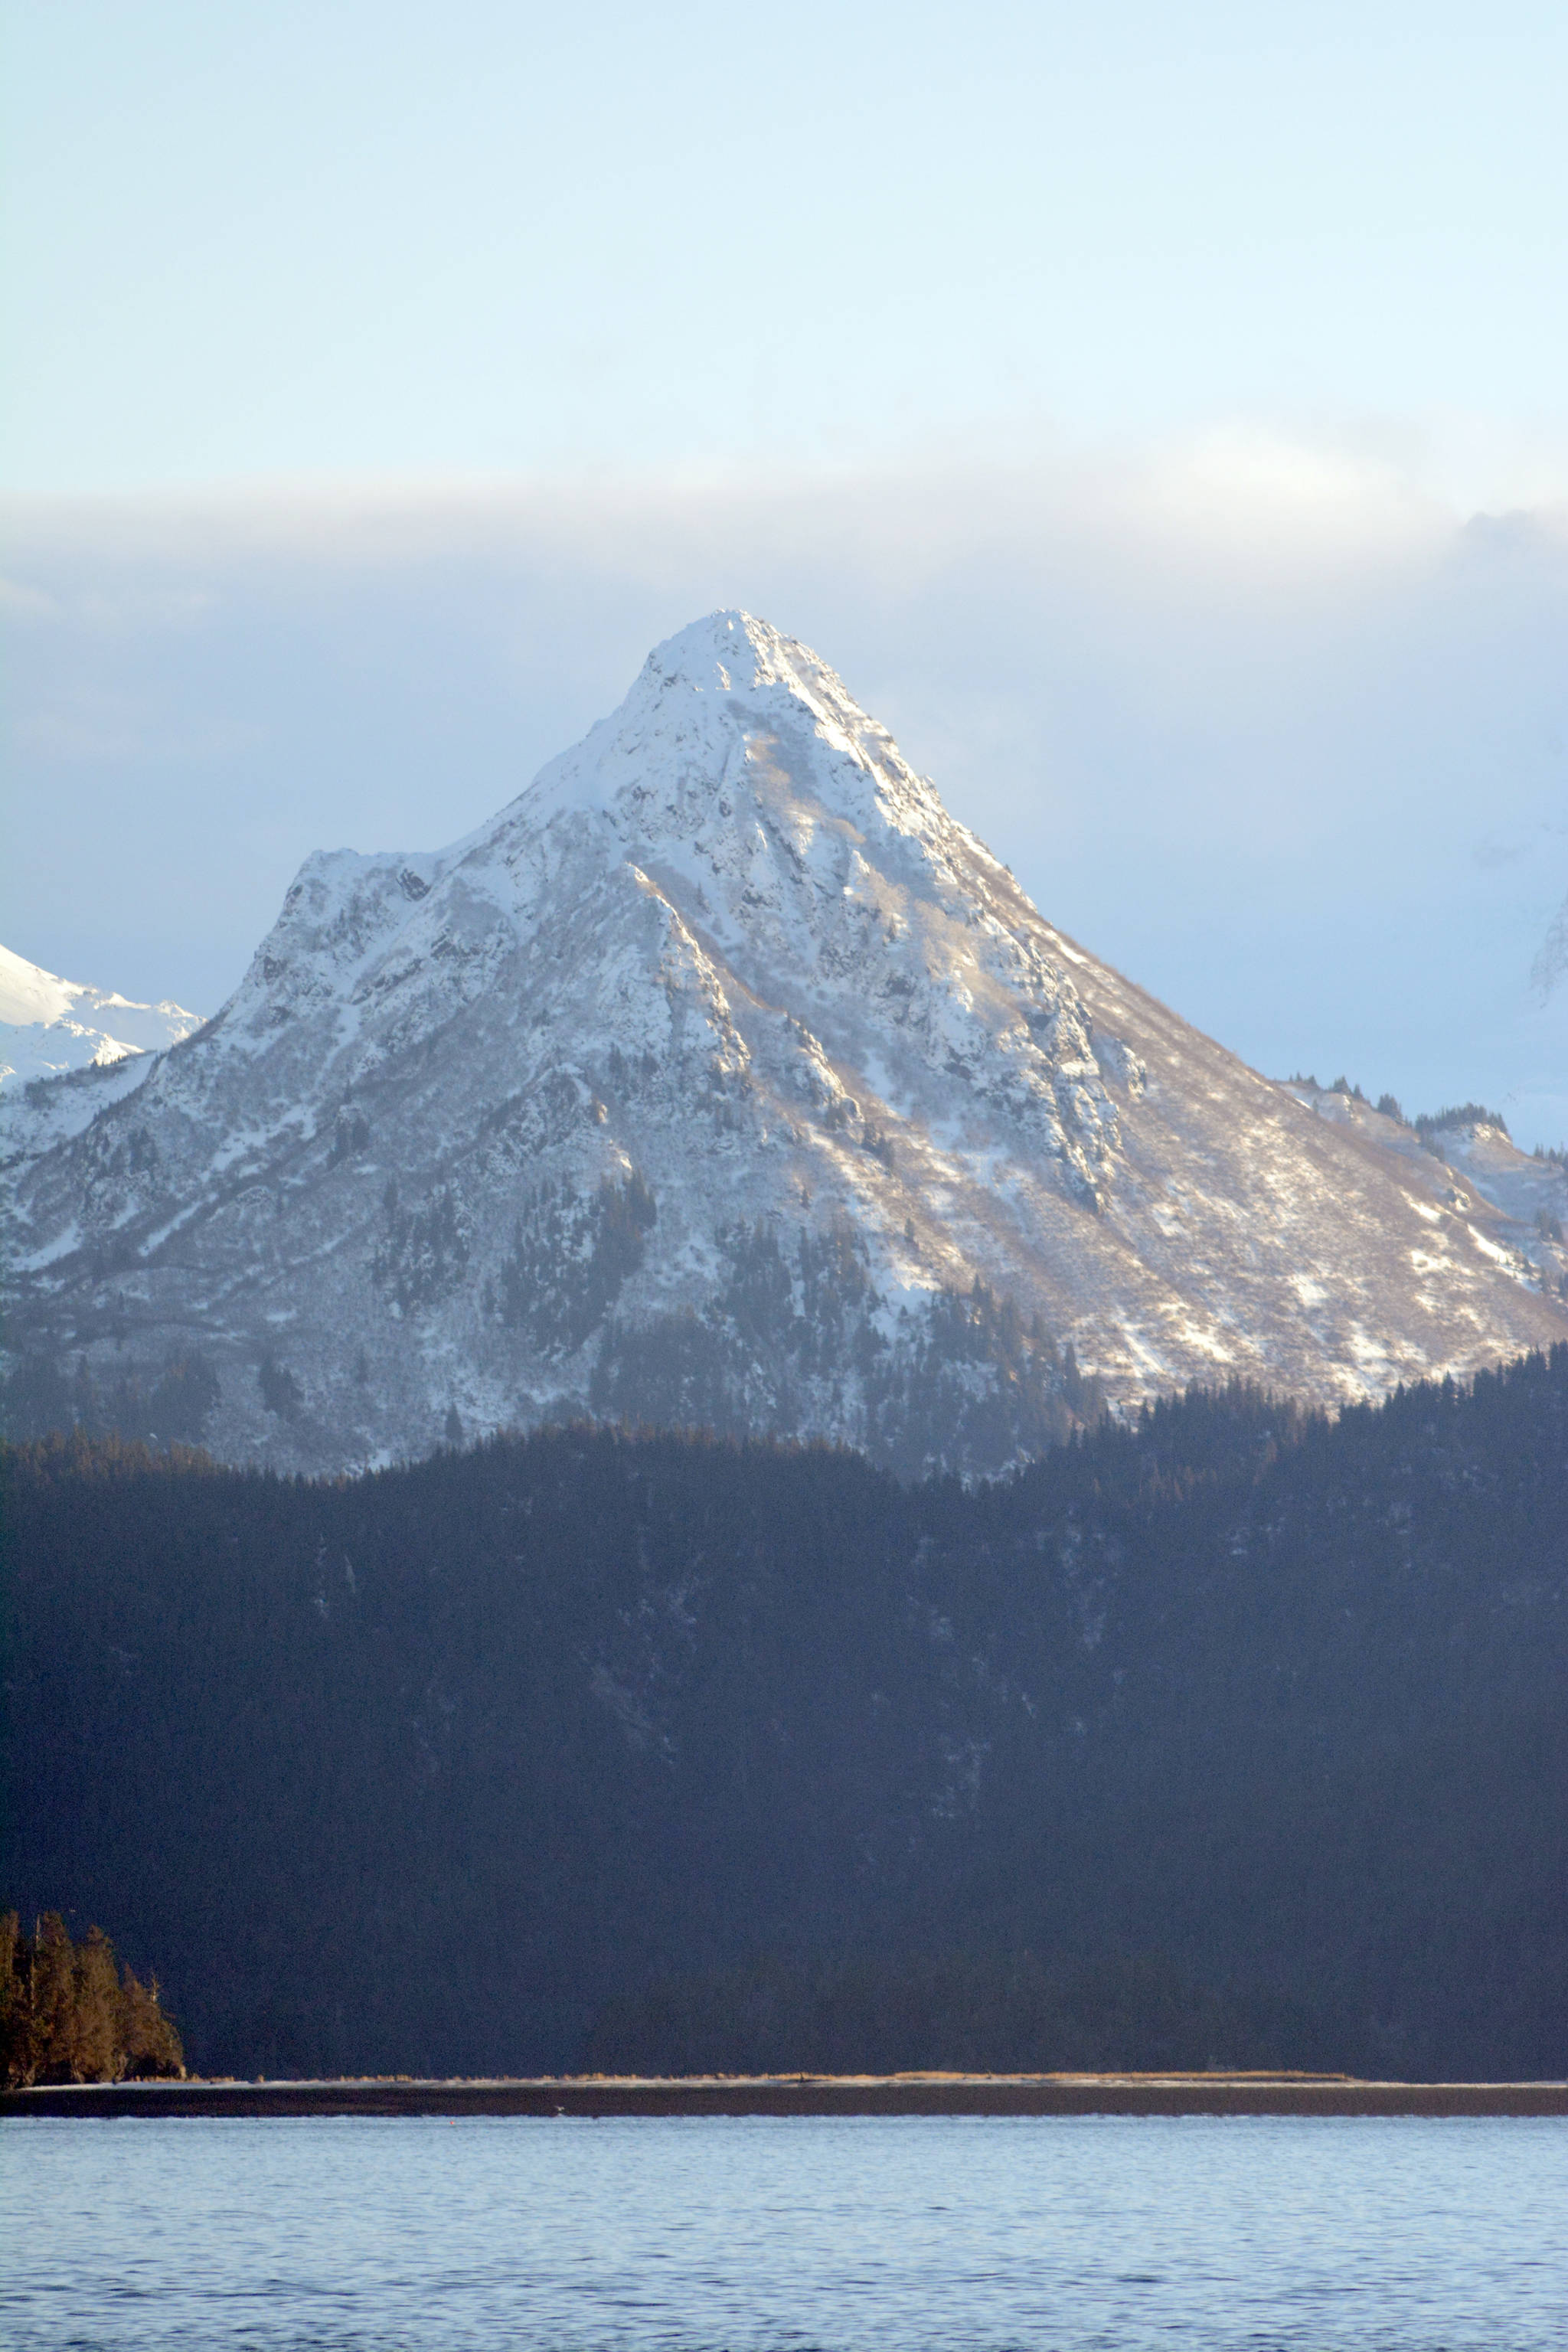 The bear in the side of Poot Peak has emerged for the winter after snow fell on the mountain Friday, Dec. 8, 2017 in Homer, Alaska, highlighting the image of of a head, nose and eyes. (Photo by Michael Armstrong, Homer News)